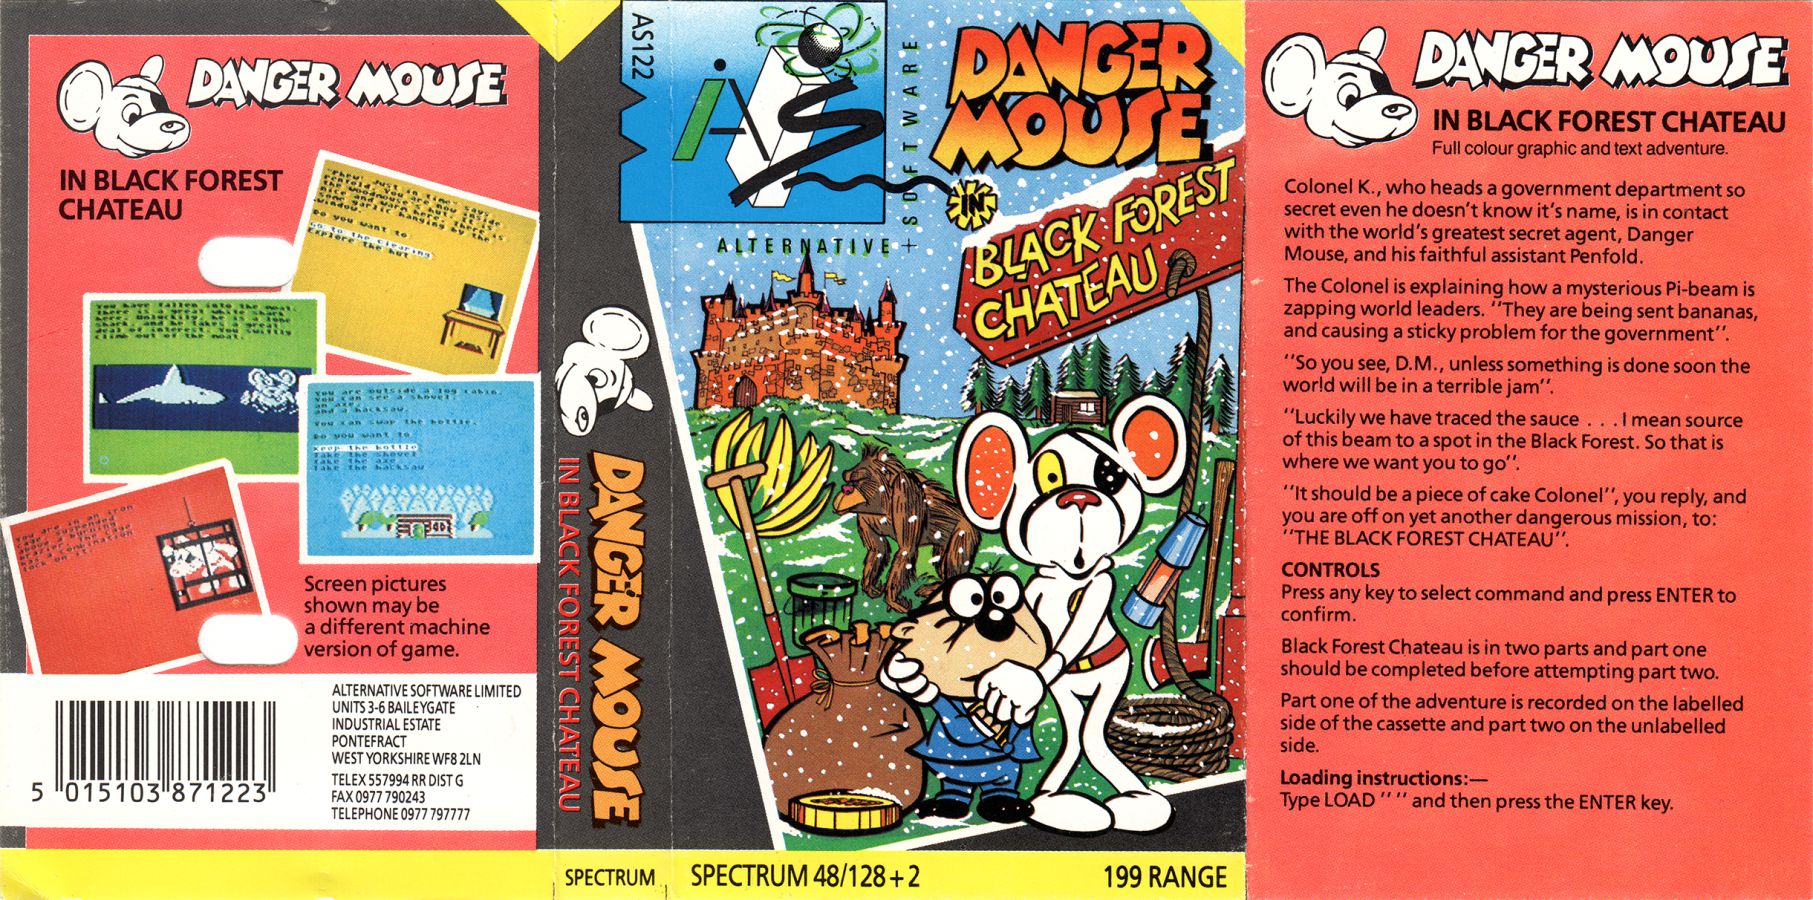 Danger Mouse in the Black Forest Chateau | Danger Mouse Wiki | Fandom